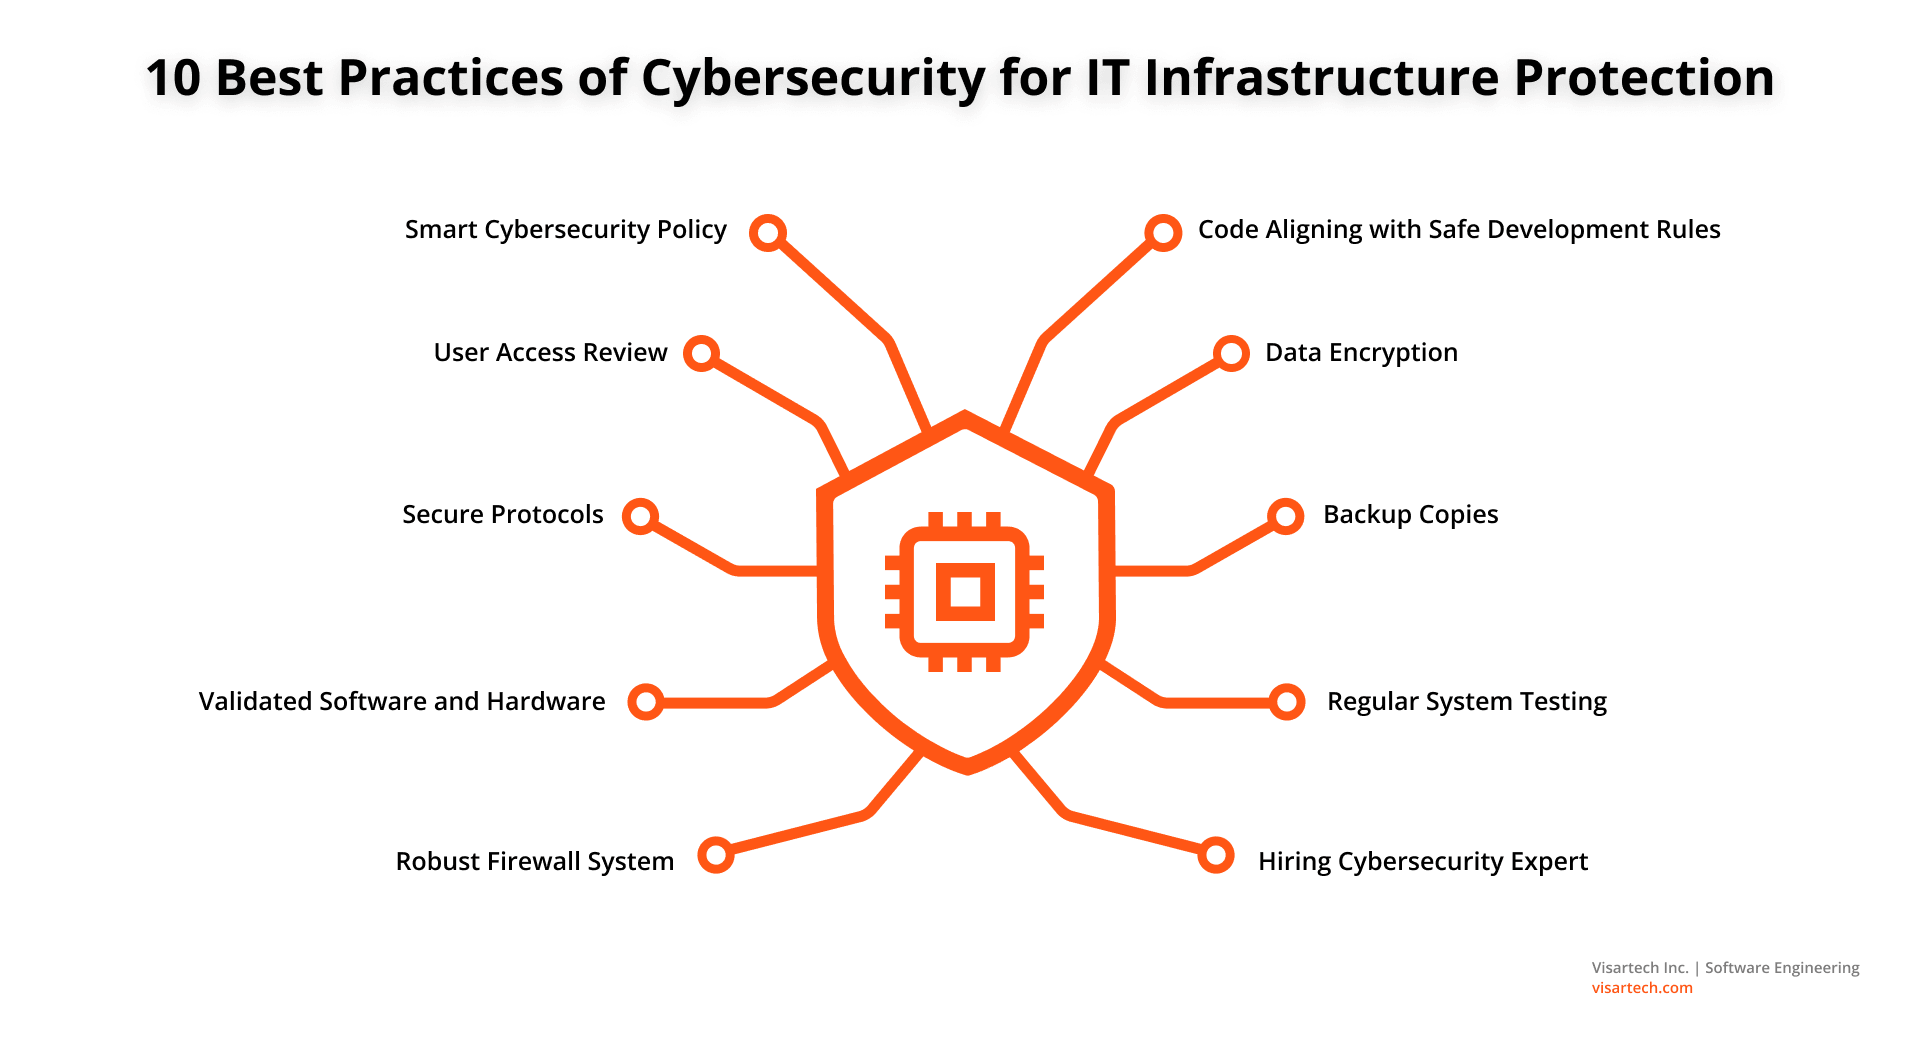 10 Best Practices of Cybersecurity for IT Infrastructure Protection - Visartech Blog